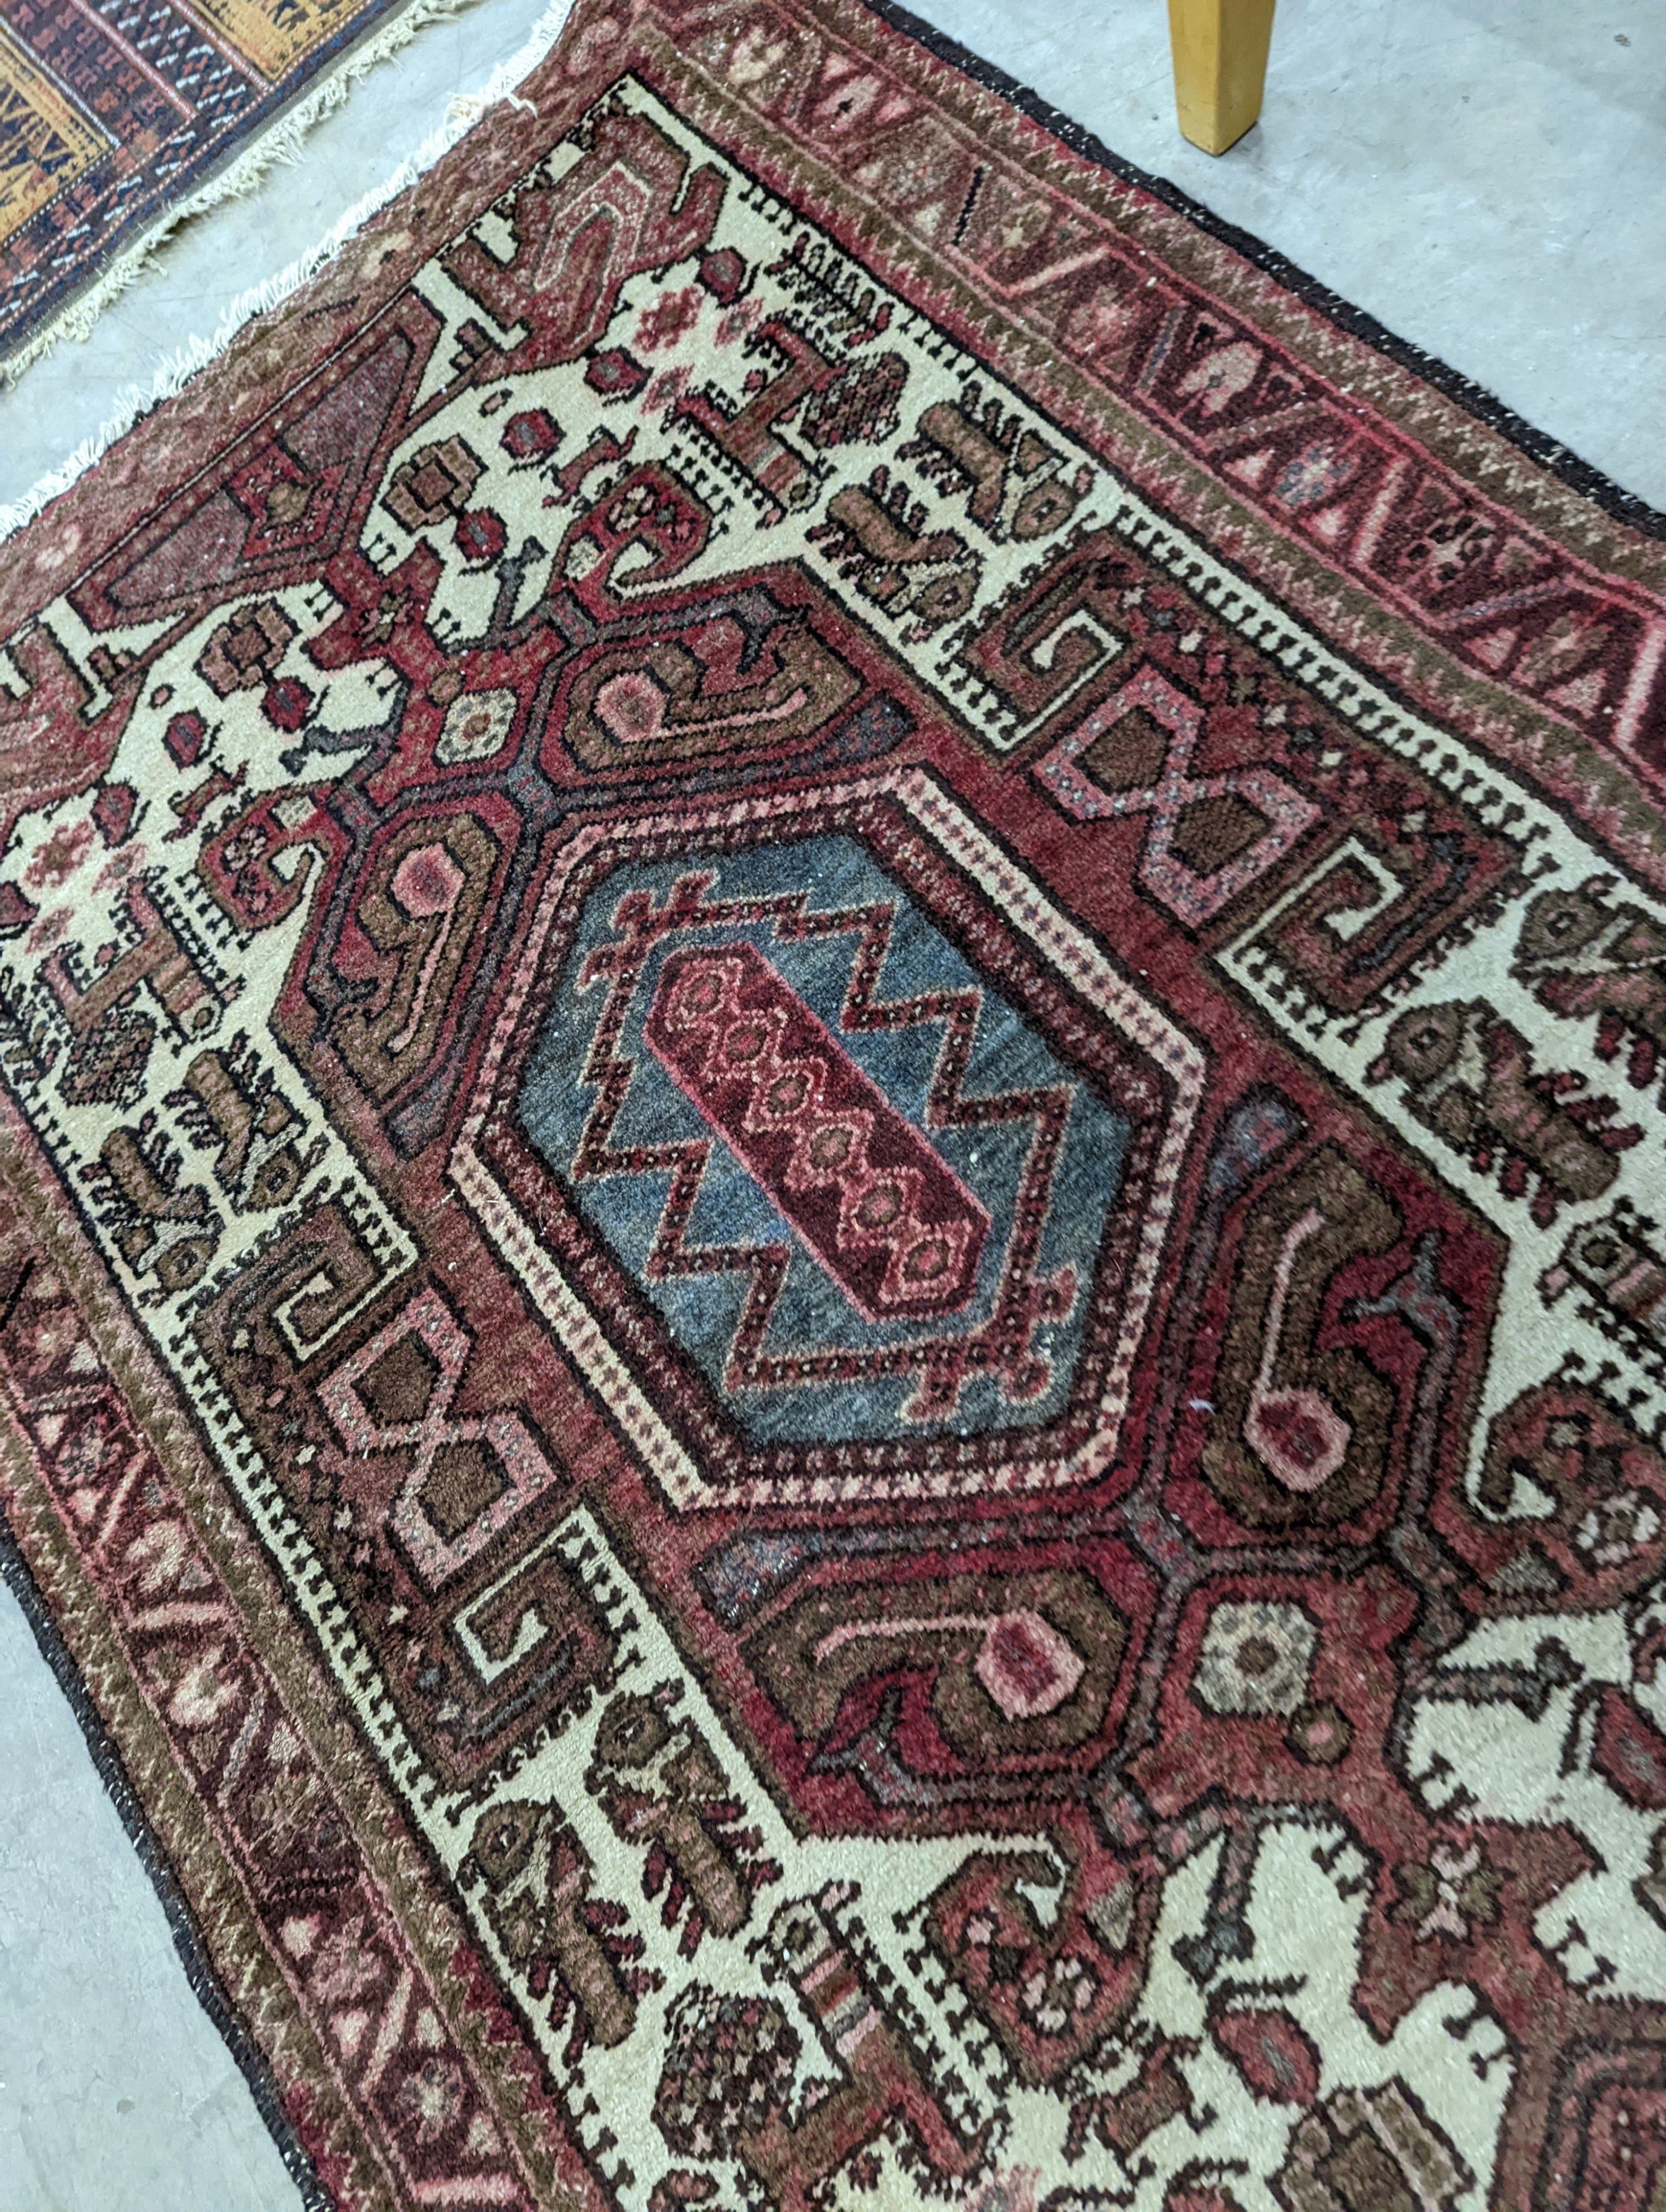 A Belouch geometric prayer rug and two Caucasian design rugs, largest 152 x 104cm